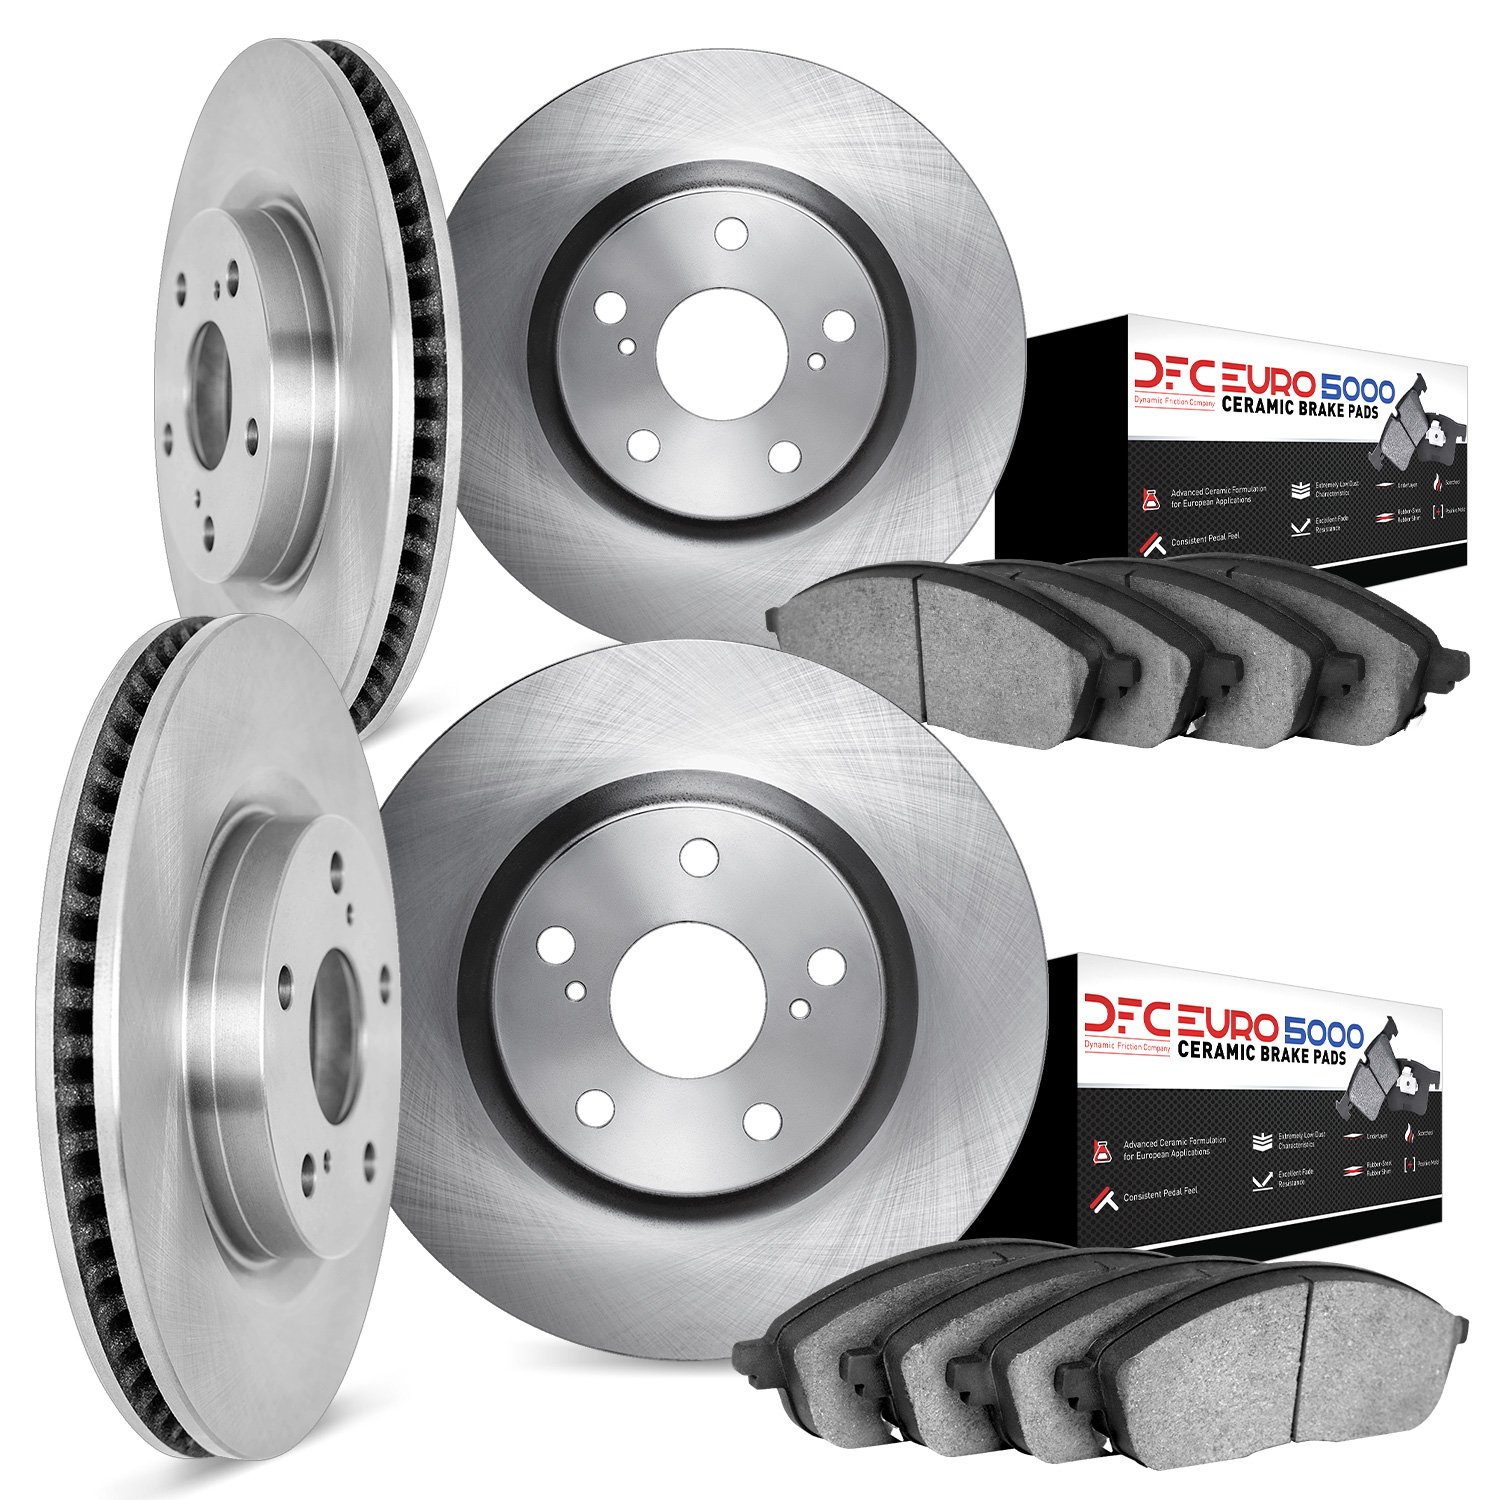 6604-31011 Brake Rotors w/5000 Euro Ceramic Brake Pads, 1991-1993 BMW, Position: Front and Rear